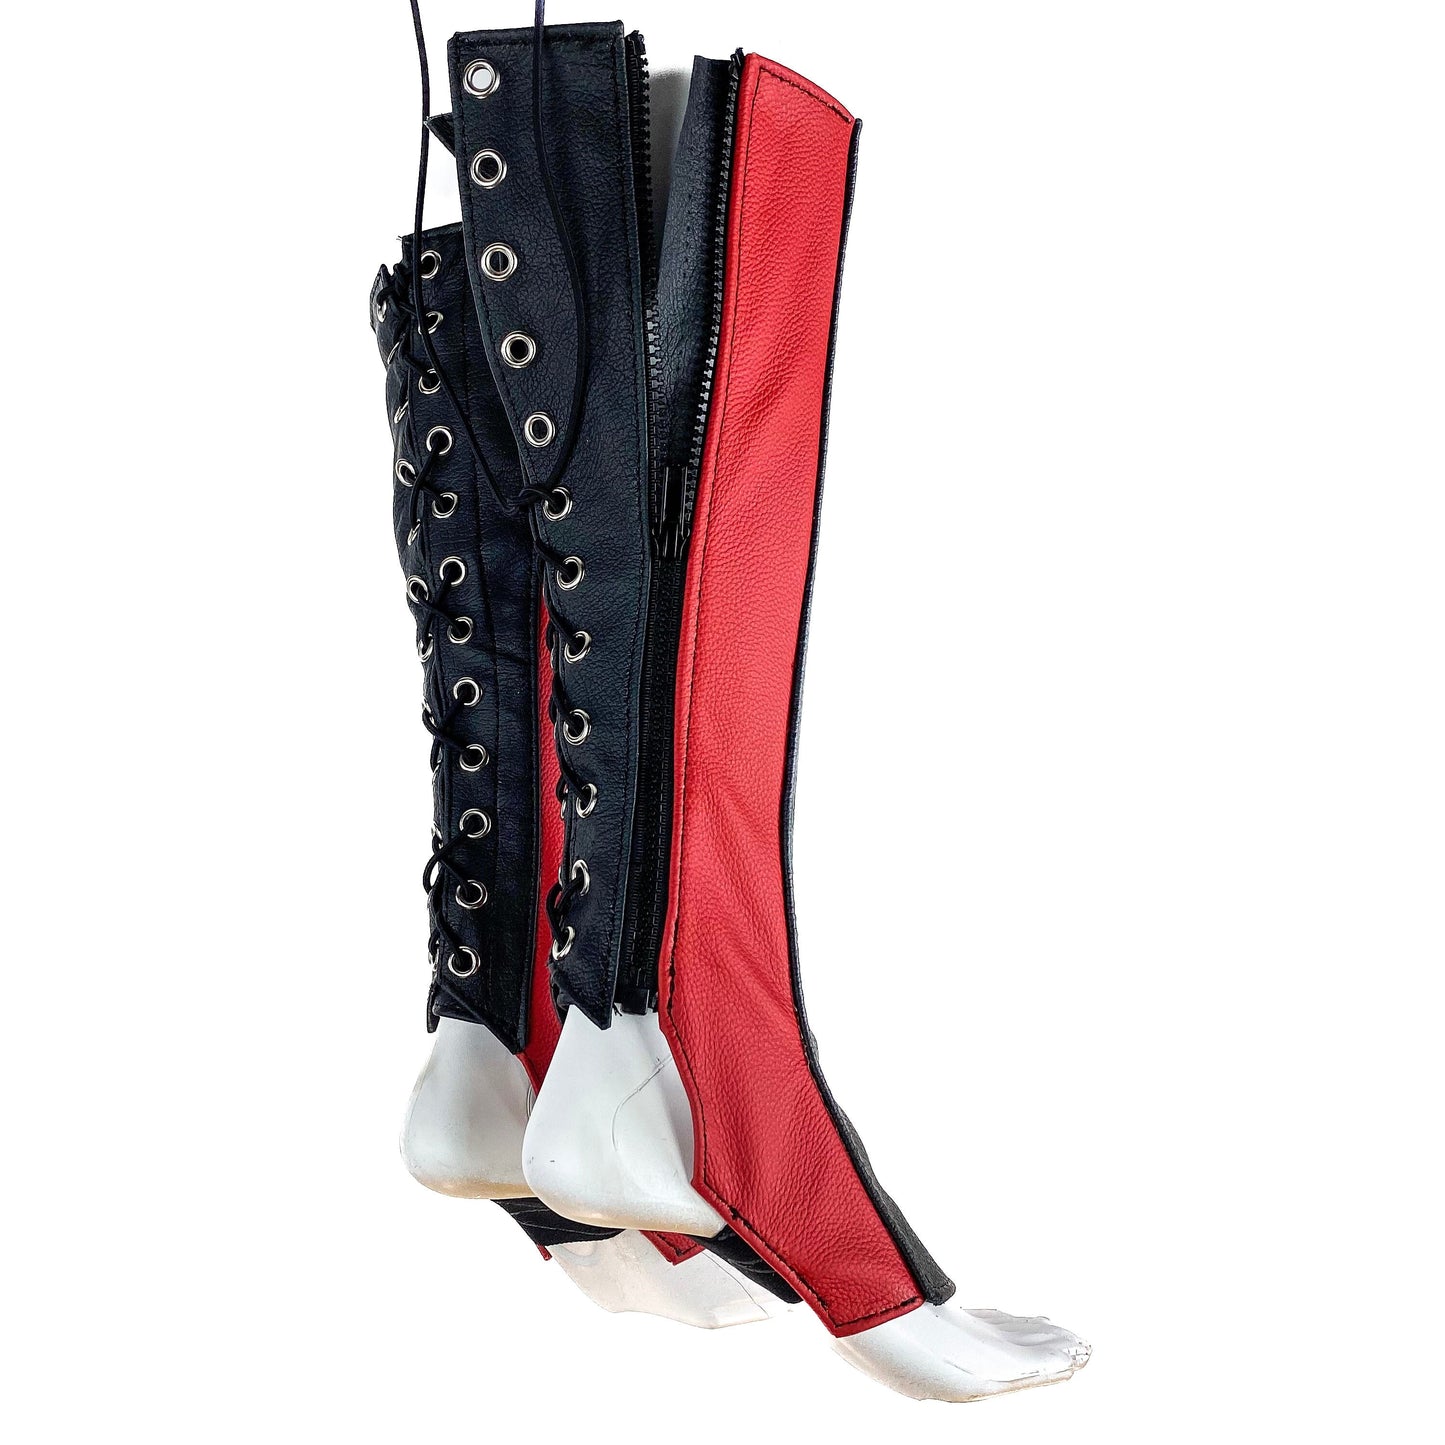 Genuine All Leather Kick Guards - Trapeze Boots - Zipper and Lace Closure - Aerial Boots/Gaiters - for Acrobatics, Costume, Wrestling